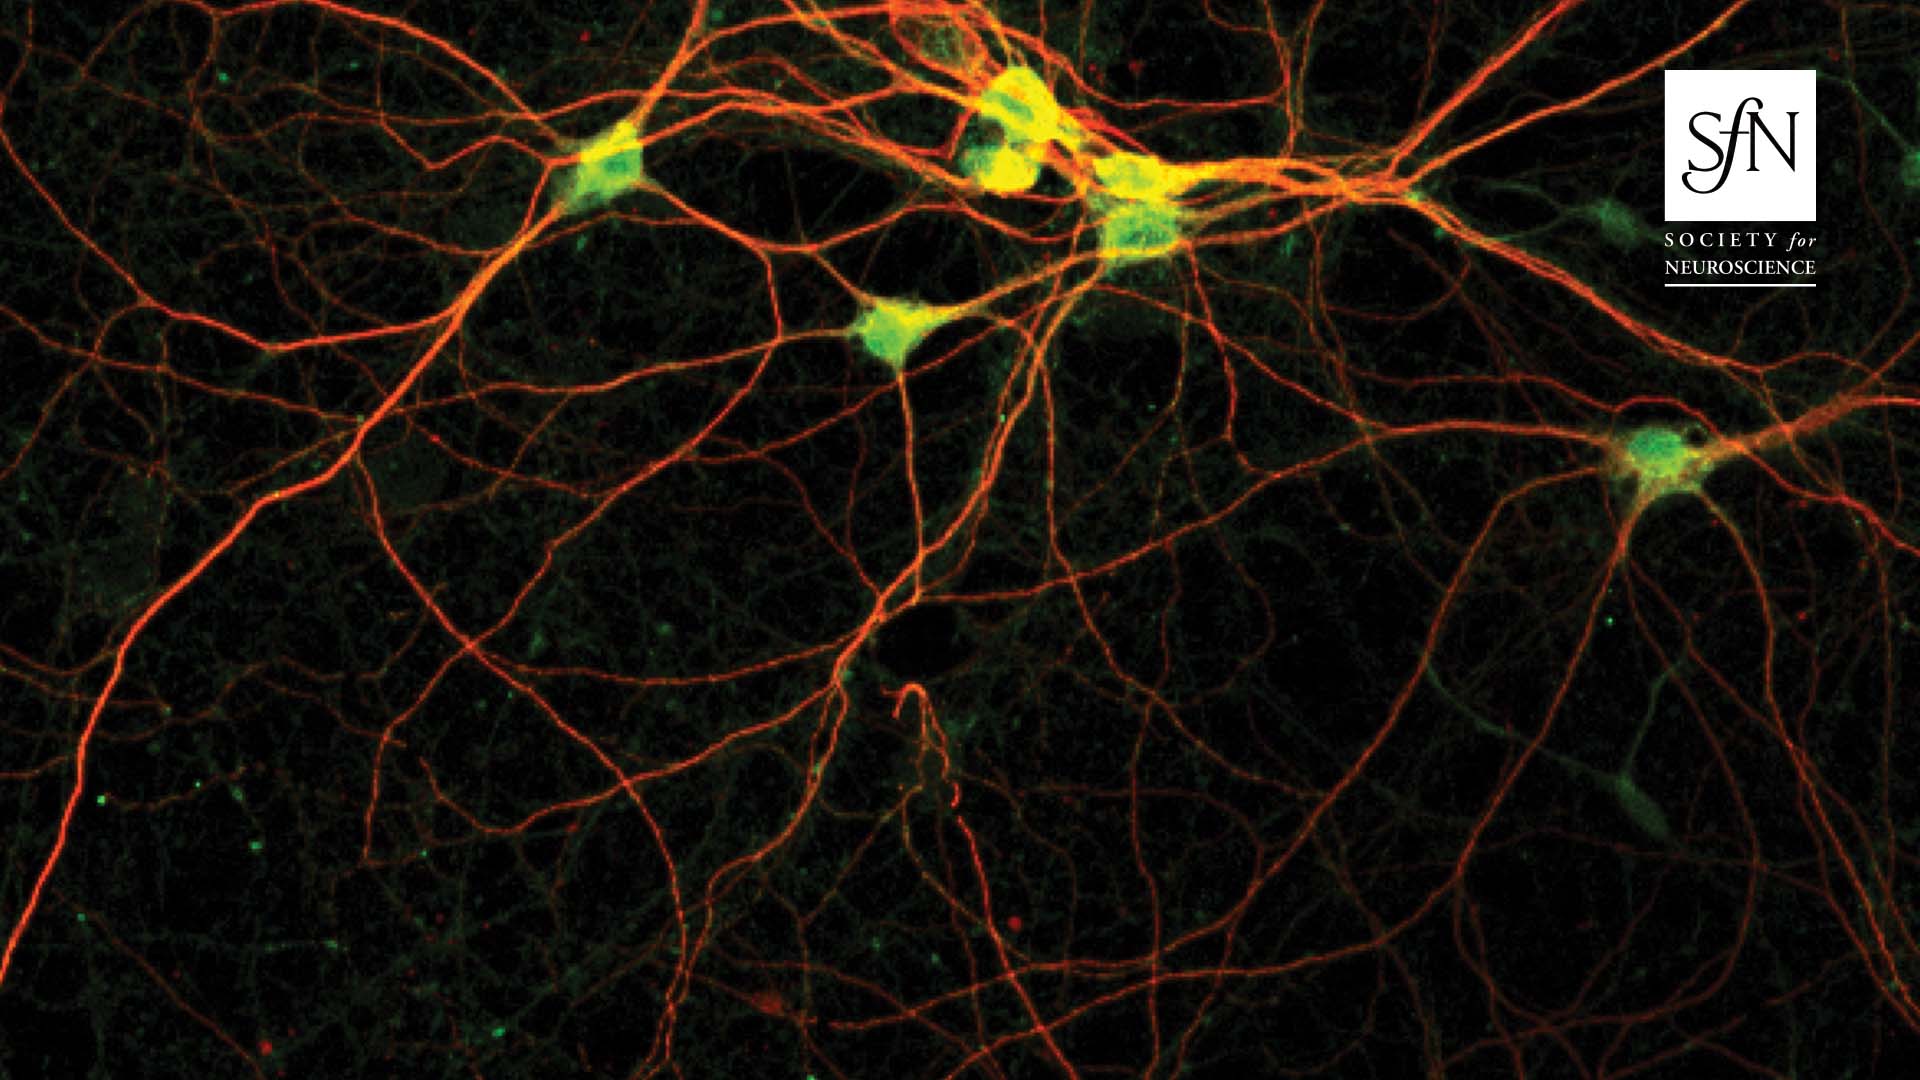 The image shows cultured neurons from mouse cortex labeled with the dendritic marker protein MAP-2 (red) and the protein kinase SLK (green). In neuronal cells, SLK regulates the formation of the distal dendritic tree and the stabilization of inhibitory synapses. For more information, see the article by Schoch et al. (pages 8111–8125). Cover image: Barbara K. Robens.